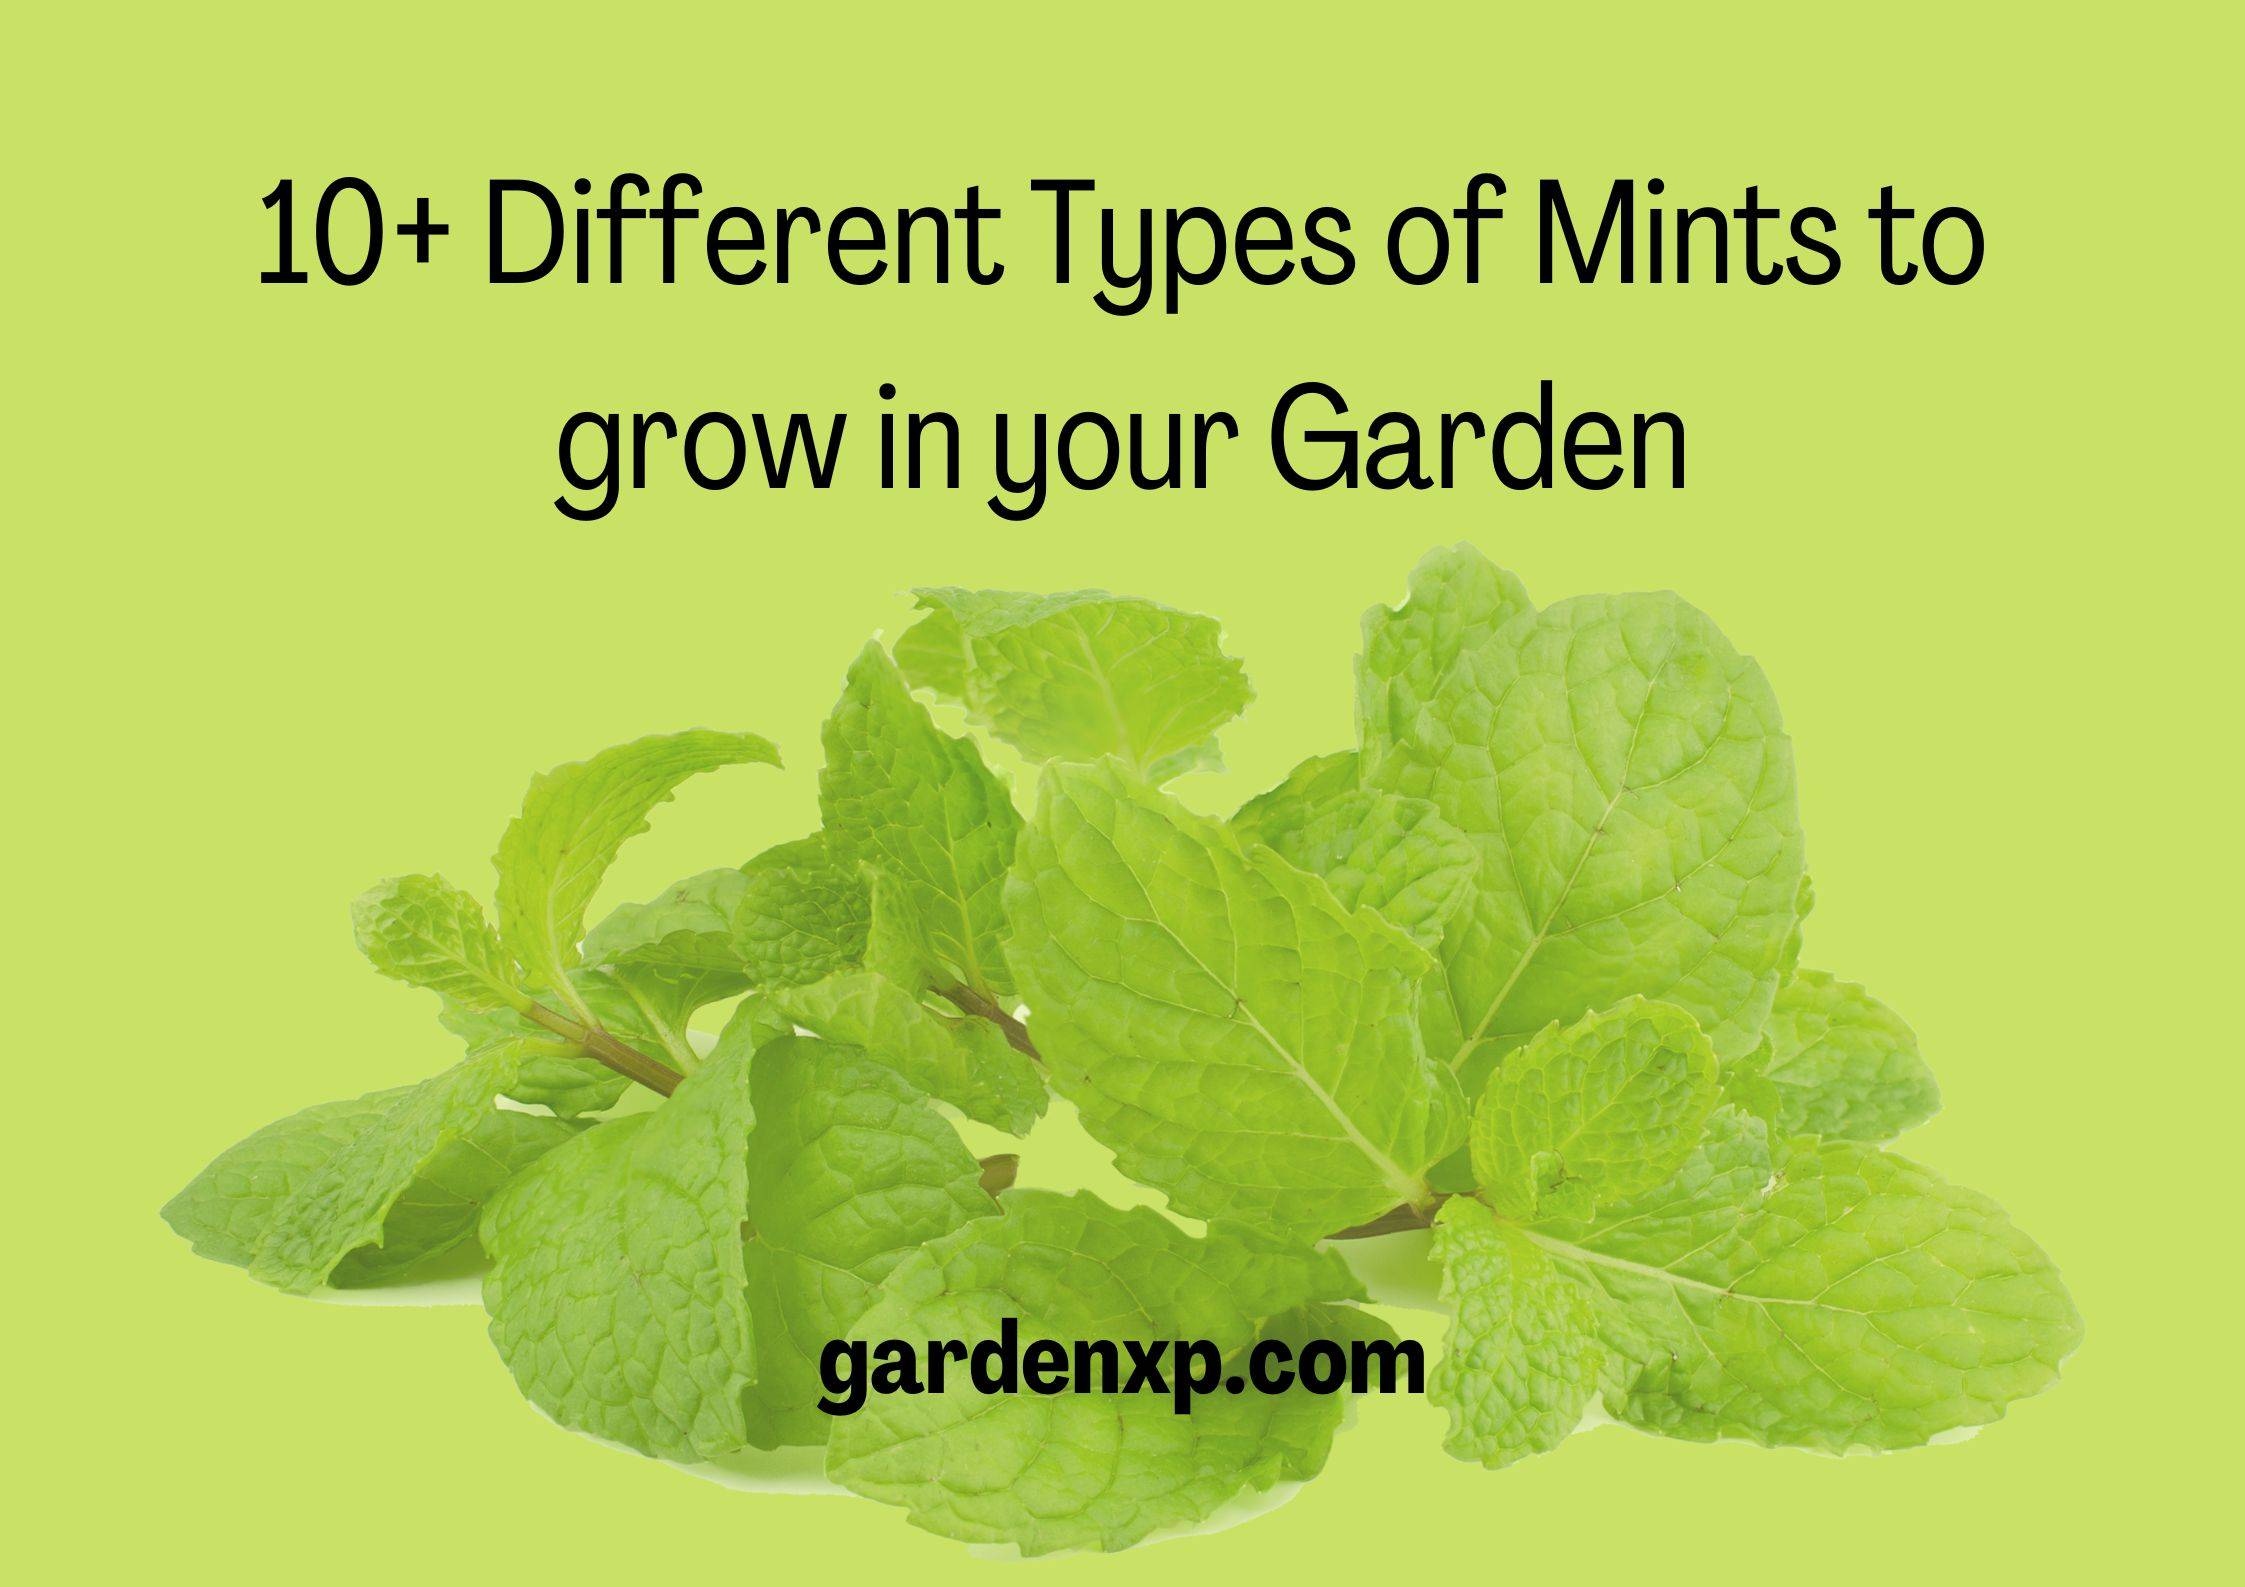 10+ Different Types of Mints to grow in your Garden